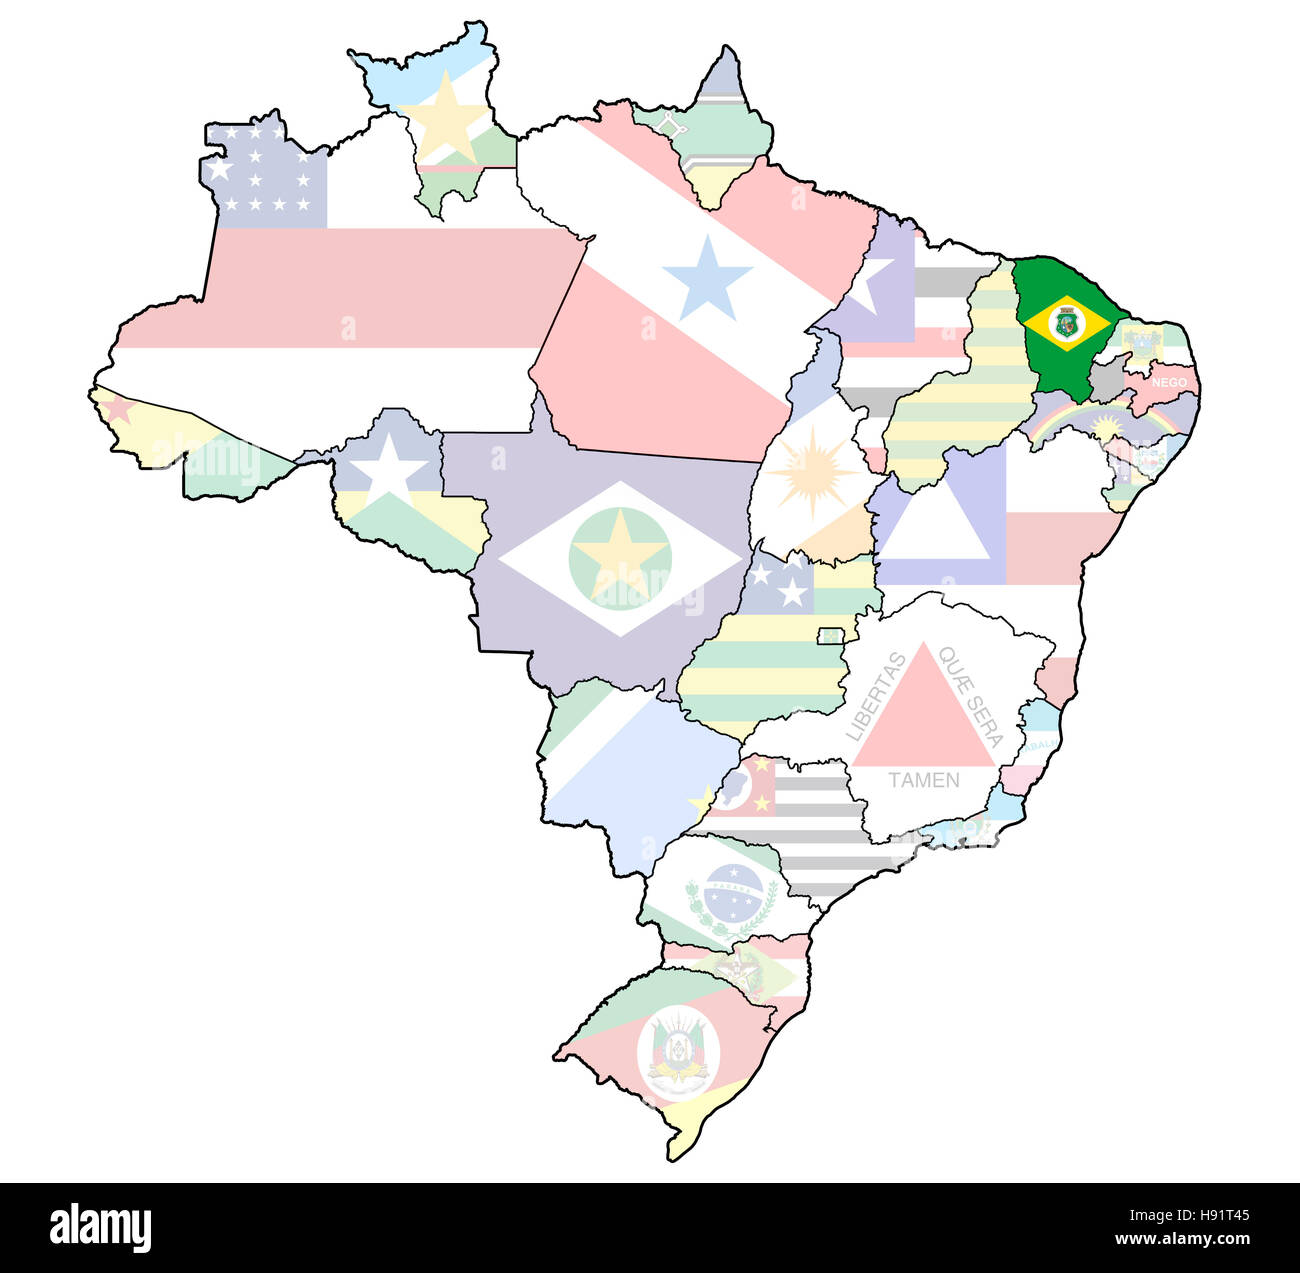 ceara on admistration map of brazil with flags Stock Photo